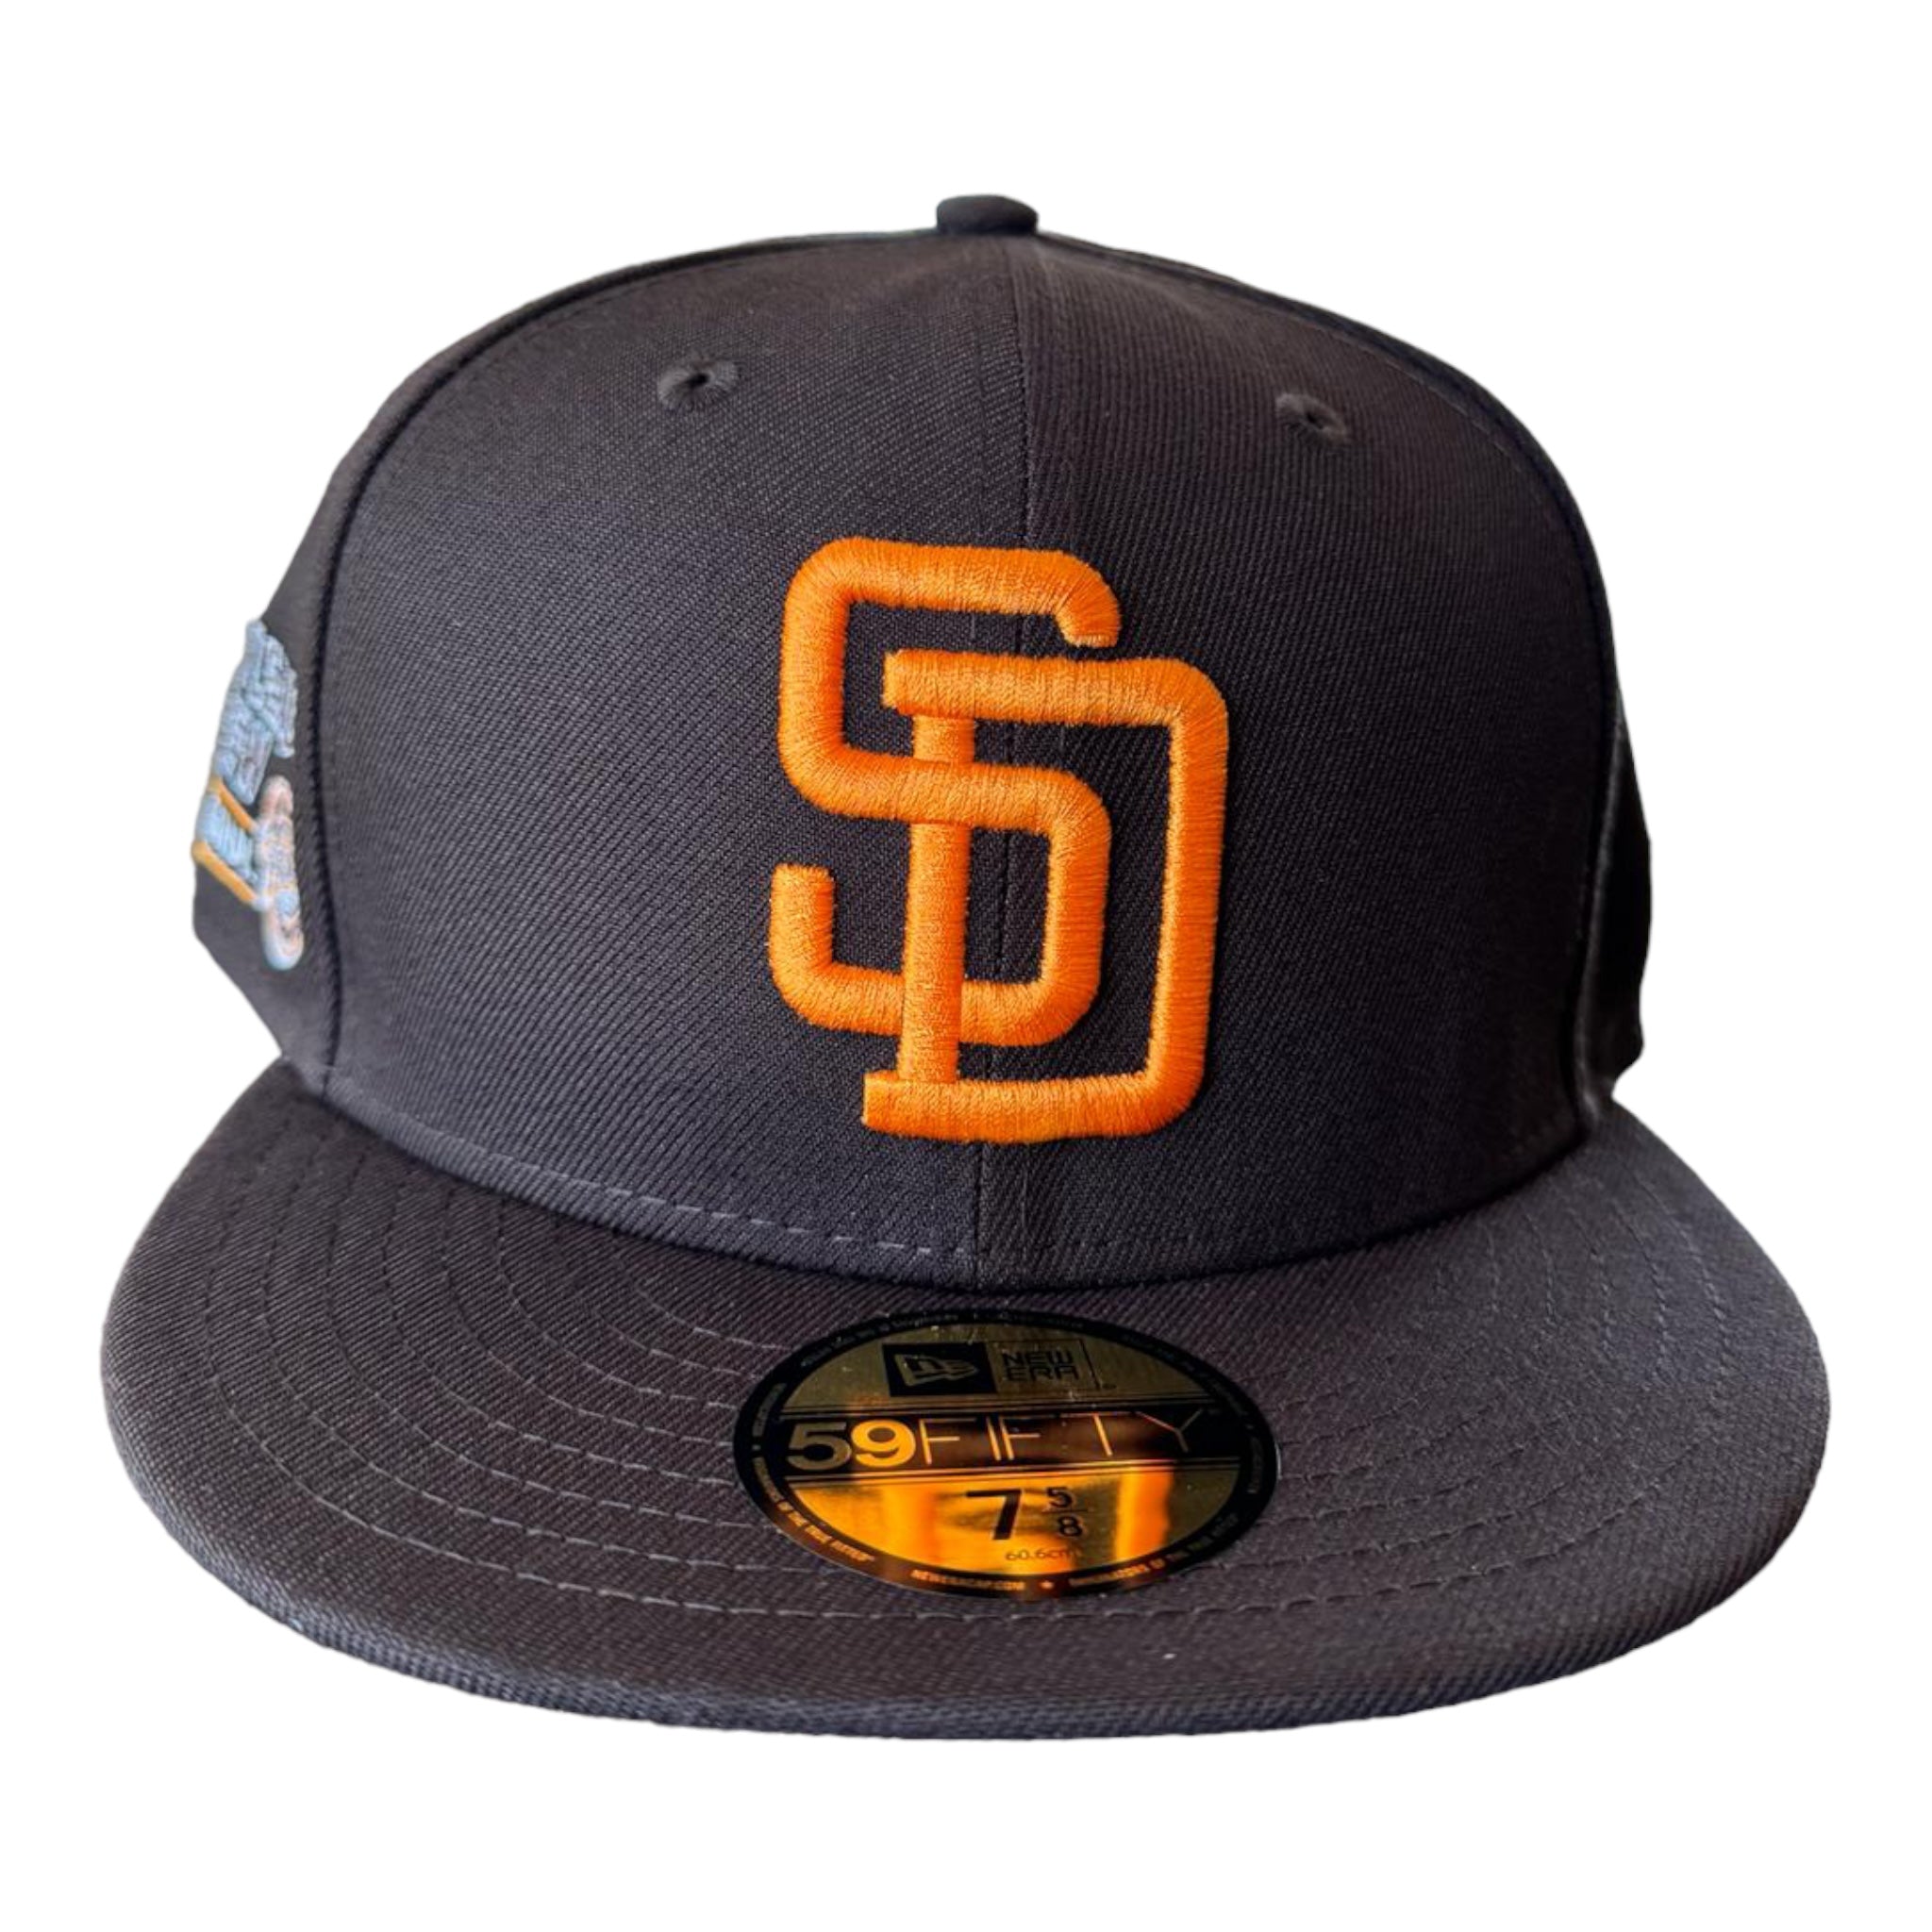 NEW ERA: Padres Big League Fitted 60507025